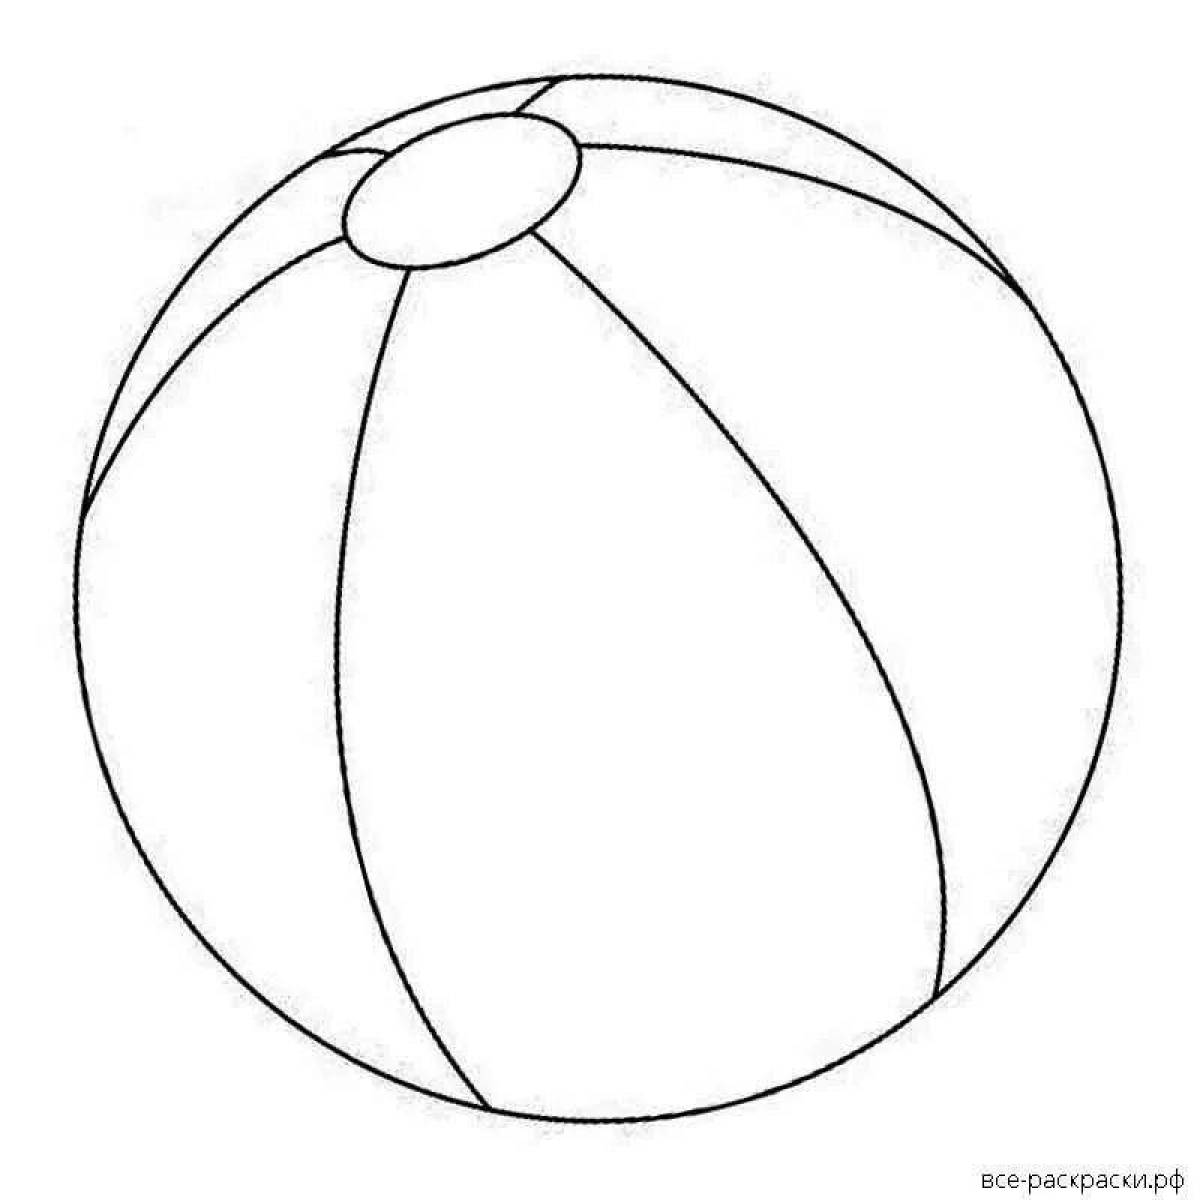 Adorable ball coloring page for 3-4 year olds